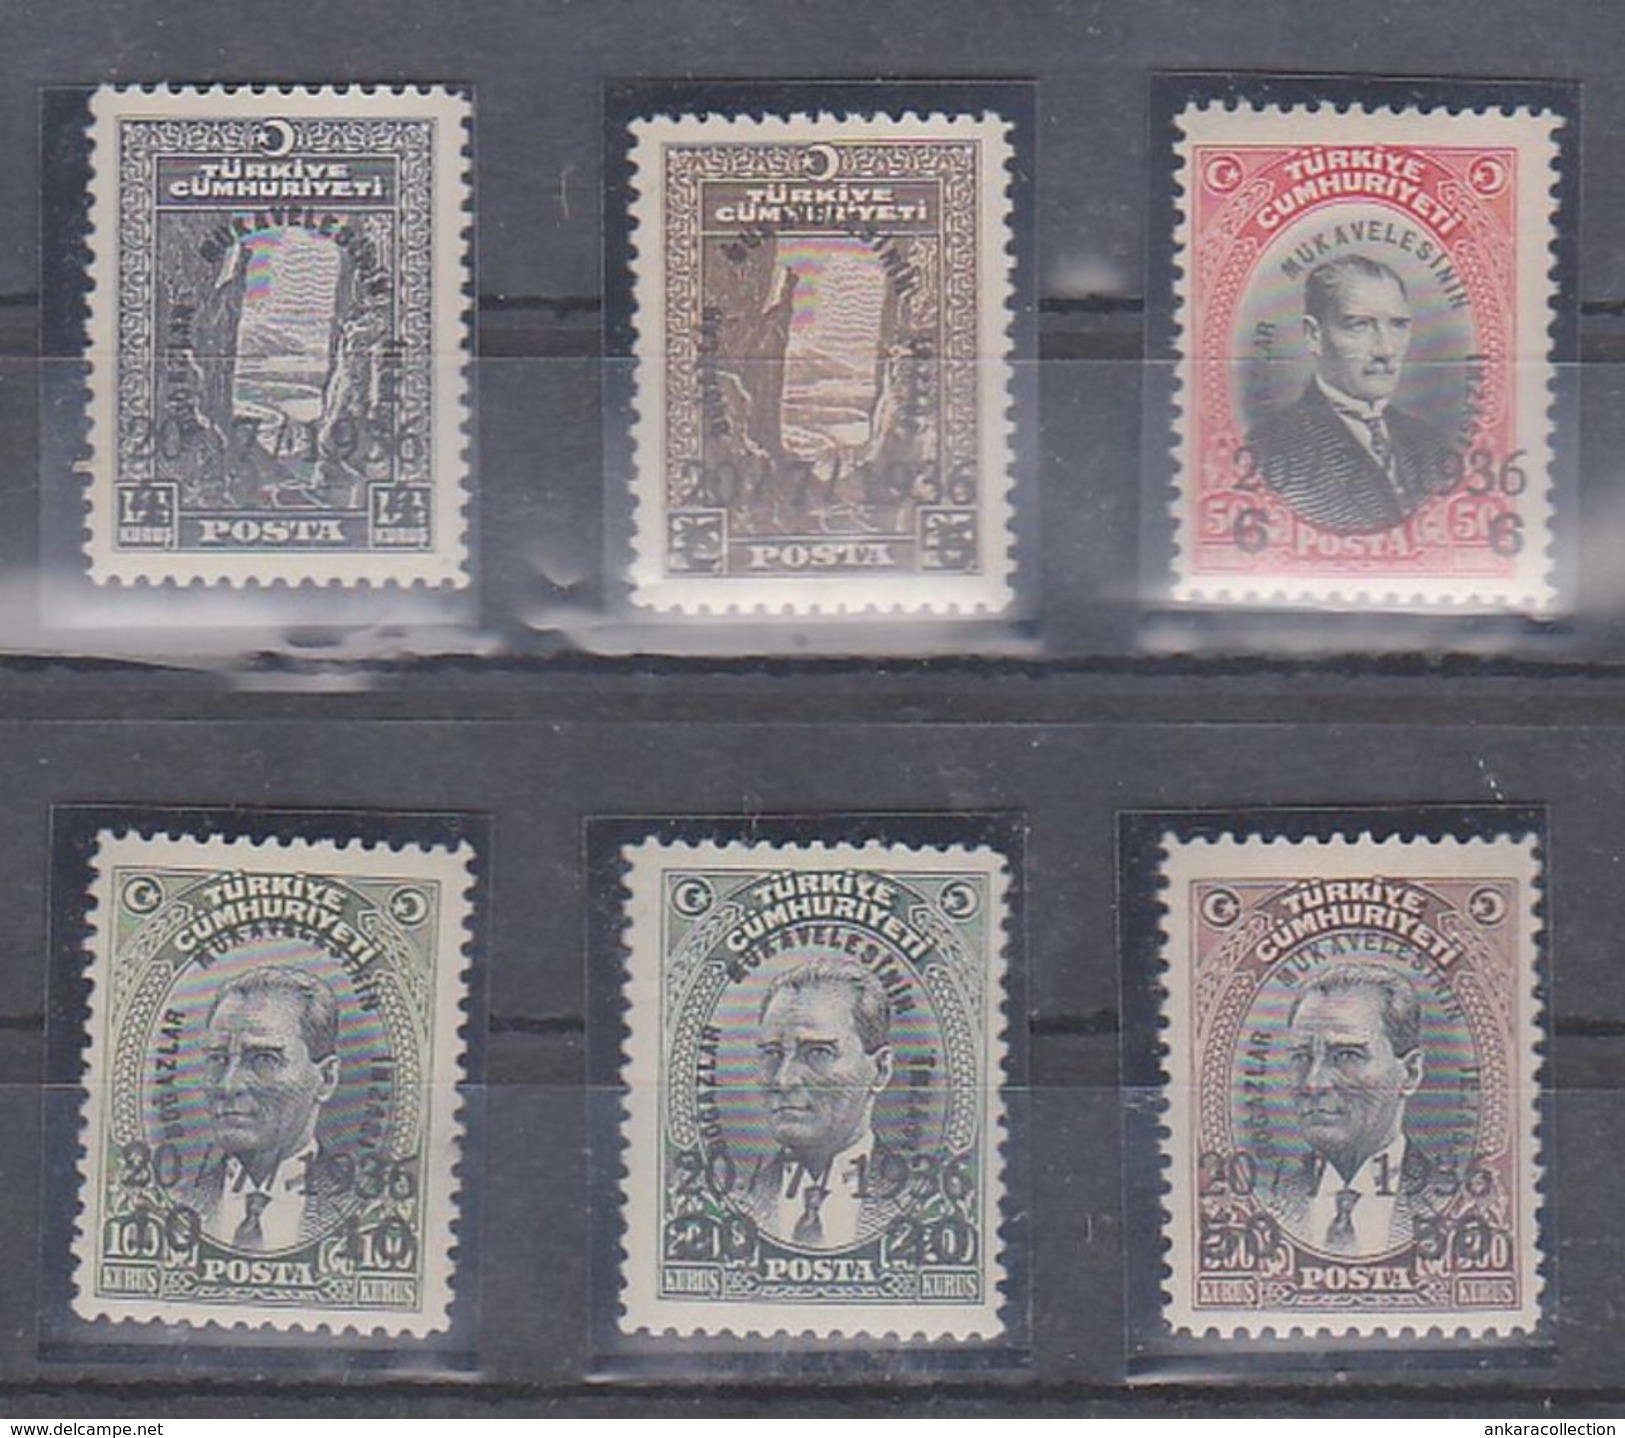 AC - TURKEY STAMP - SURCHARGED COMMEMORATIVE STAMPS FOR THE SIGNATURE OF THE STRAITS SETTLEMENTS MNH 26 OCTOBER 1936 - Nuevos